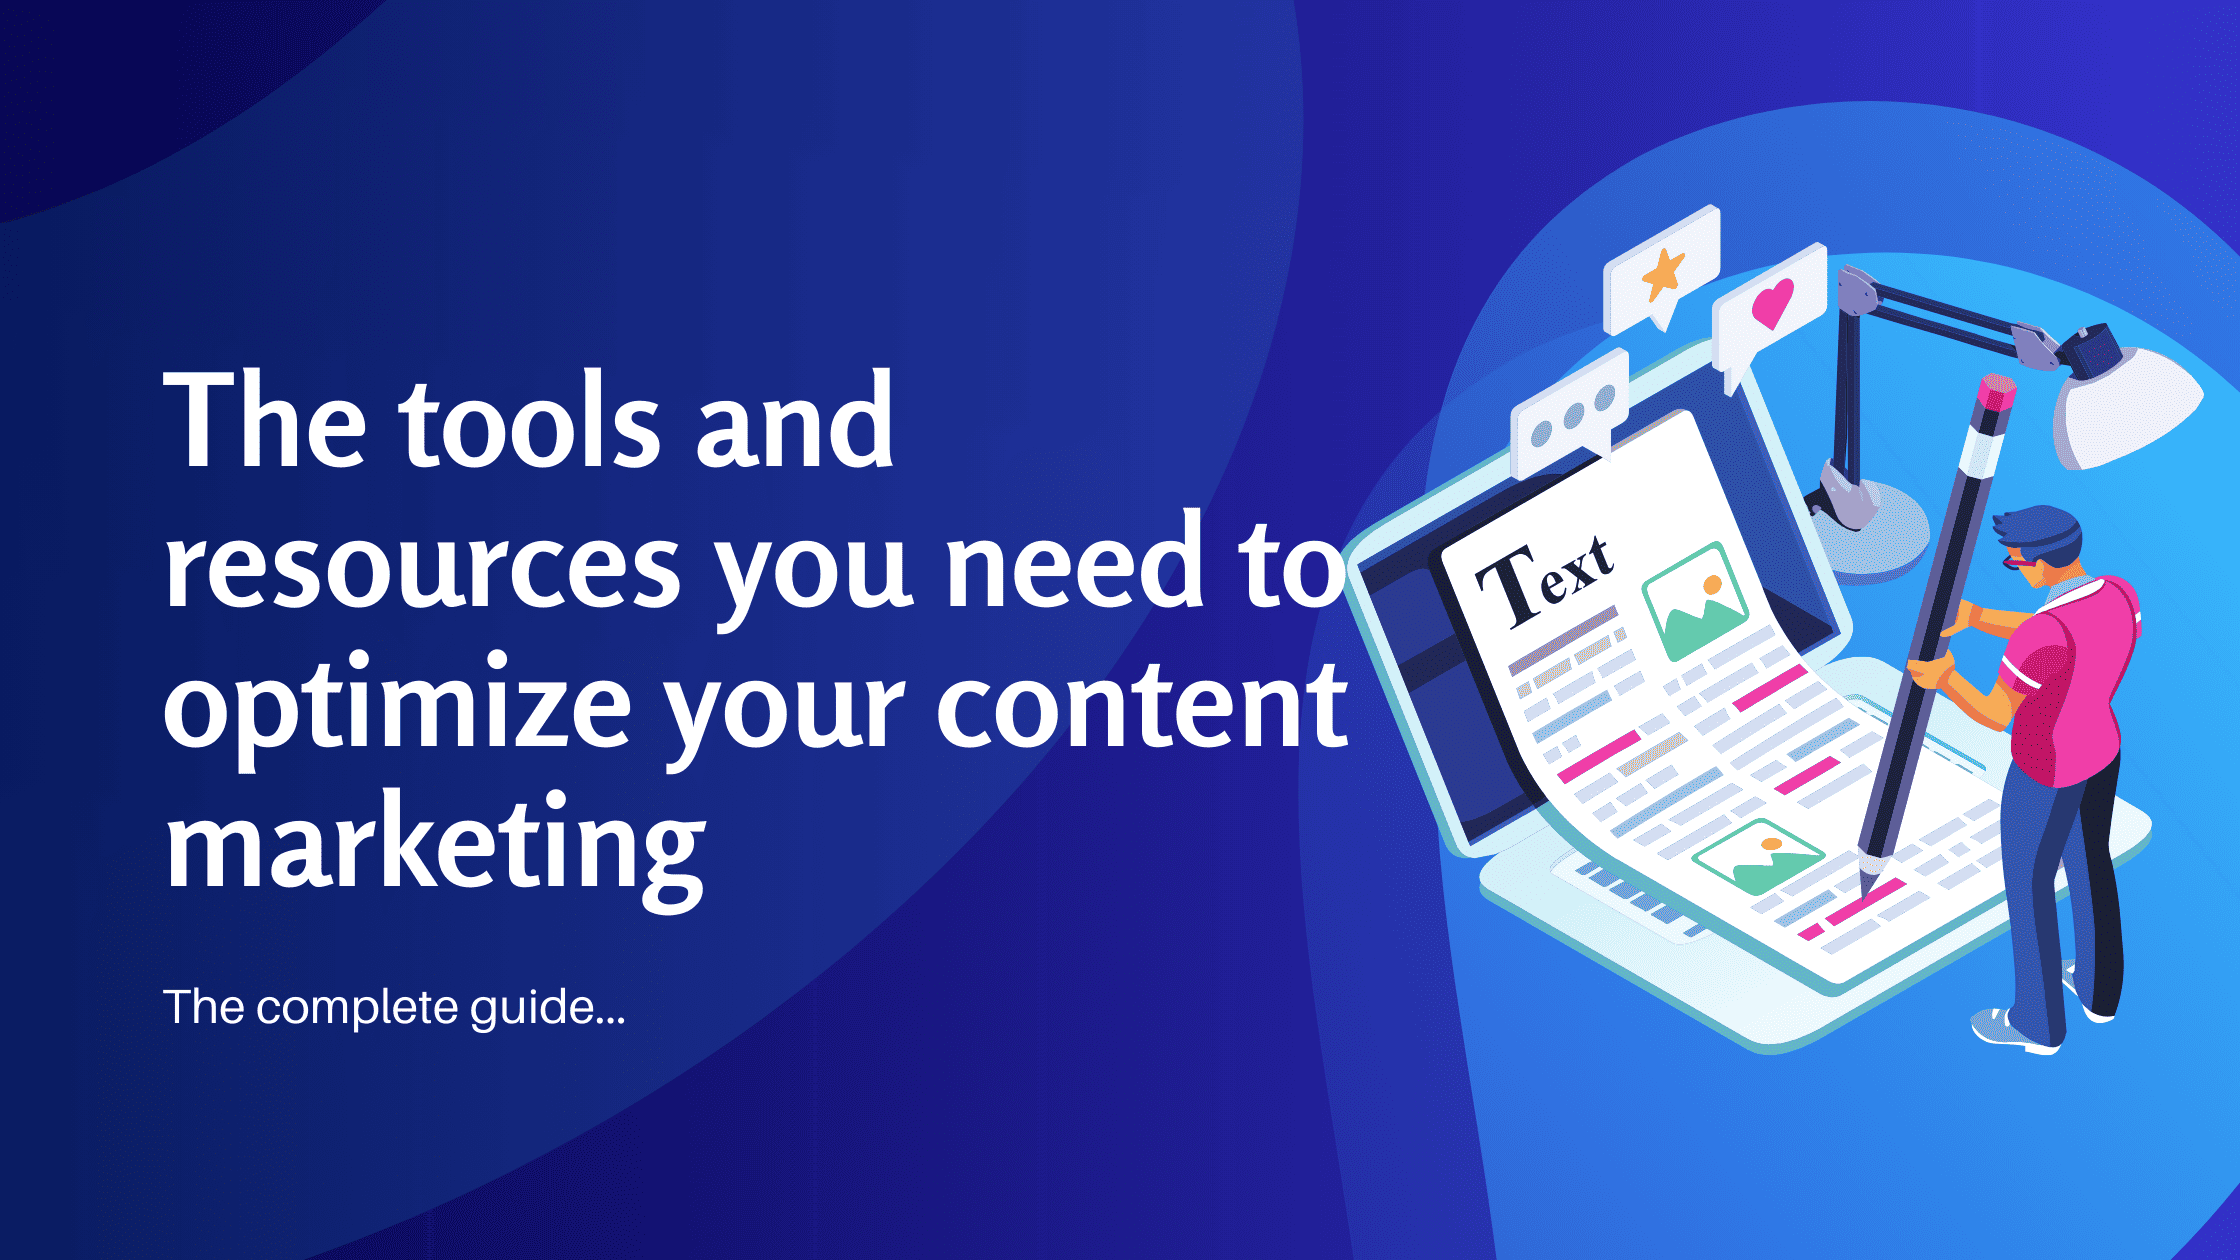 The complete guide to the tools and resources you need to optimize your content marketing - Konectiz